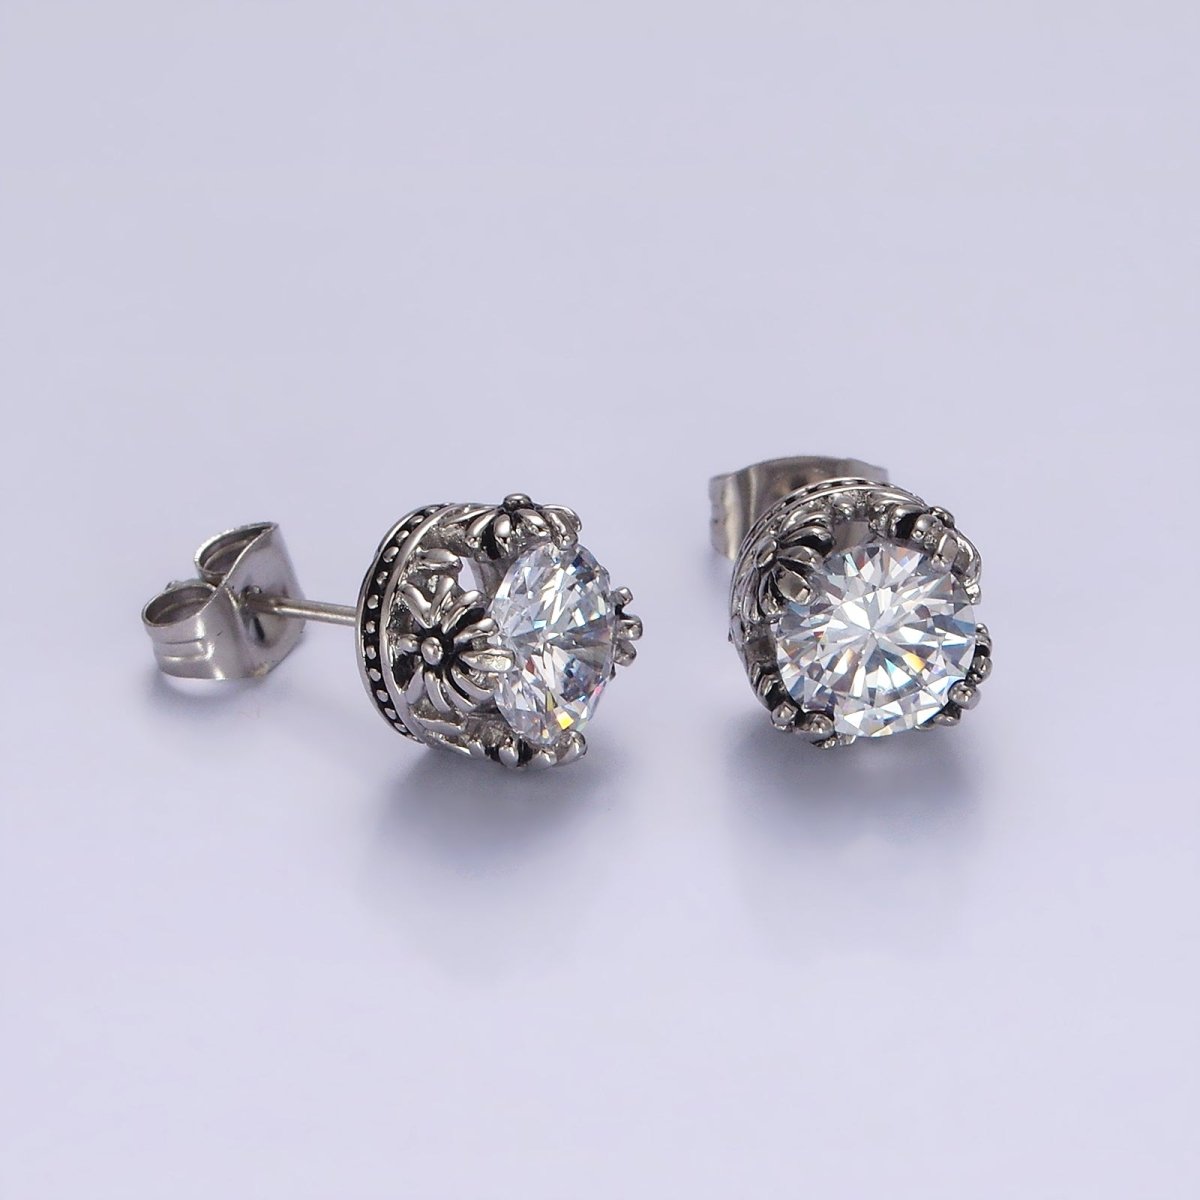 Stainless Steel 8.5mm Clear Round CZ Flower Lined Stud Earrings | AE756 - DLUXCA